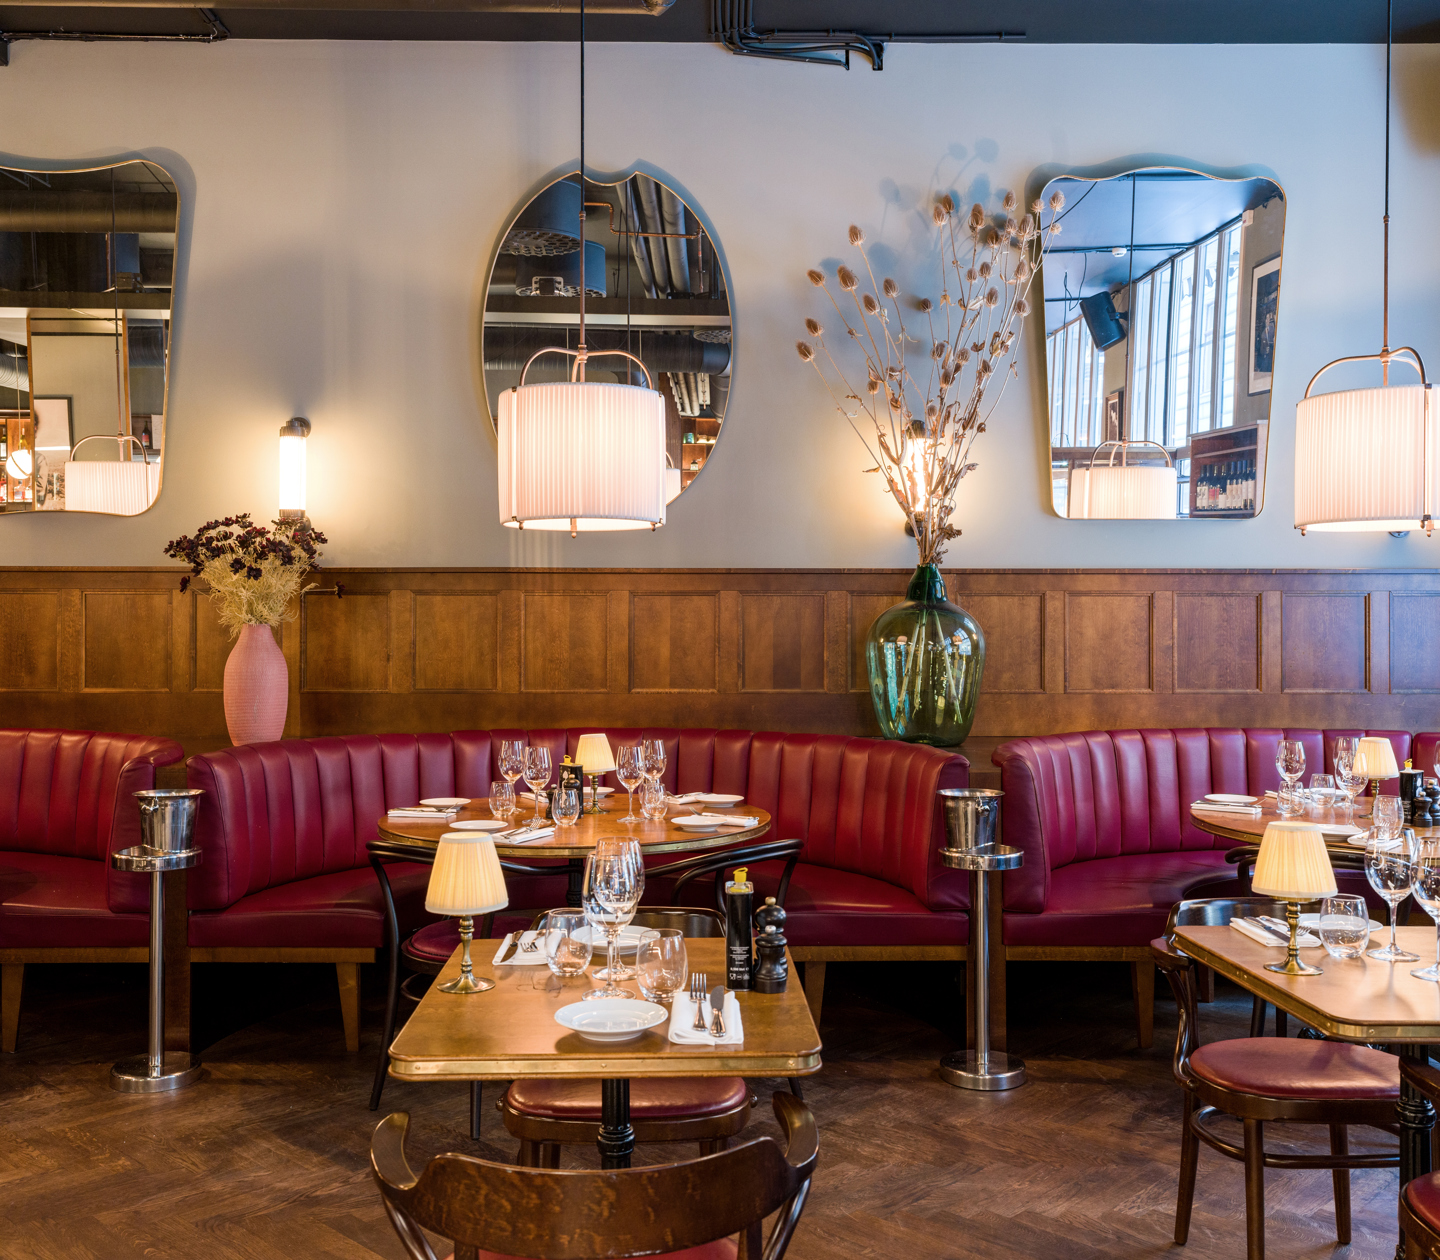 A restaurant furnished with wood and leather seating